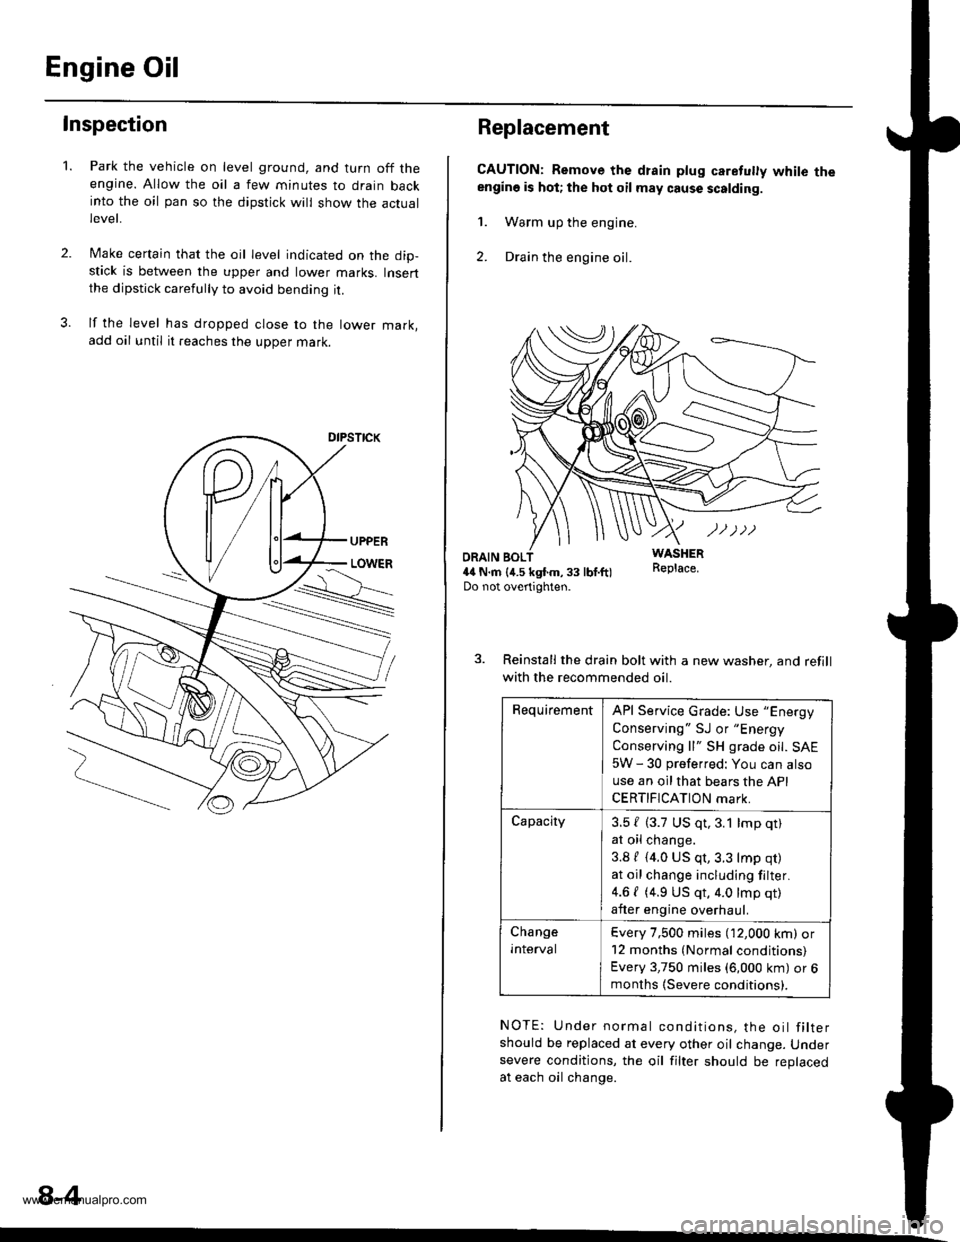 HONDA CR-V 2000 RD1-RD3 / 1.G Workshop Manual 
Engine Oil
Inspection
2.
1.Park the vehicle on level ground, and turn off theengine. Allow the oil a few minutes to drain backinto the oil pan so the dipstick will show the actuallevet,
Make certain 